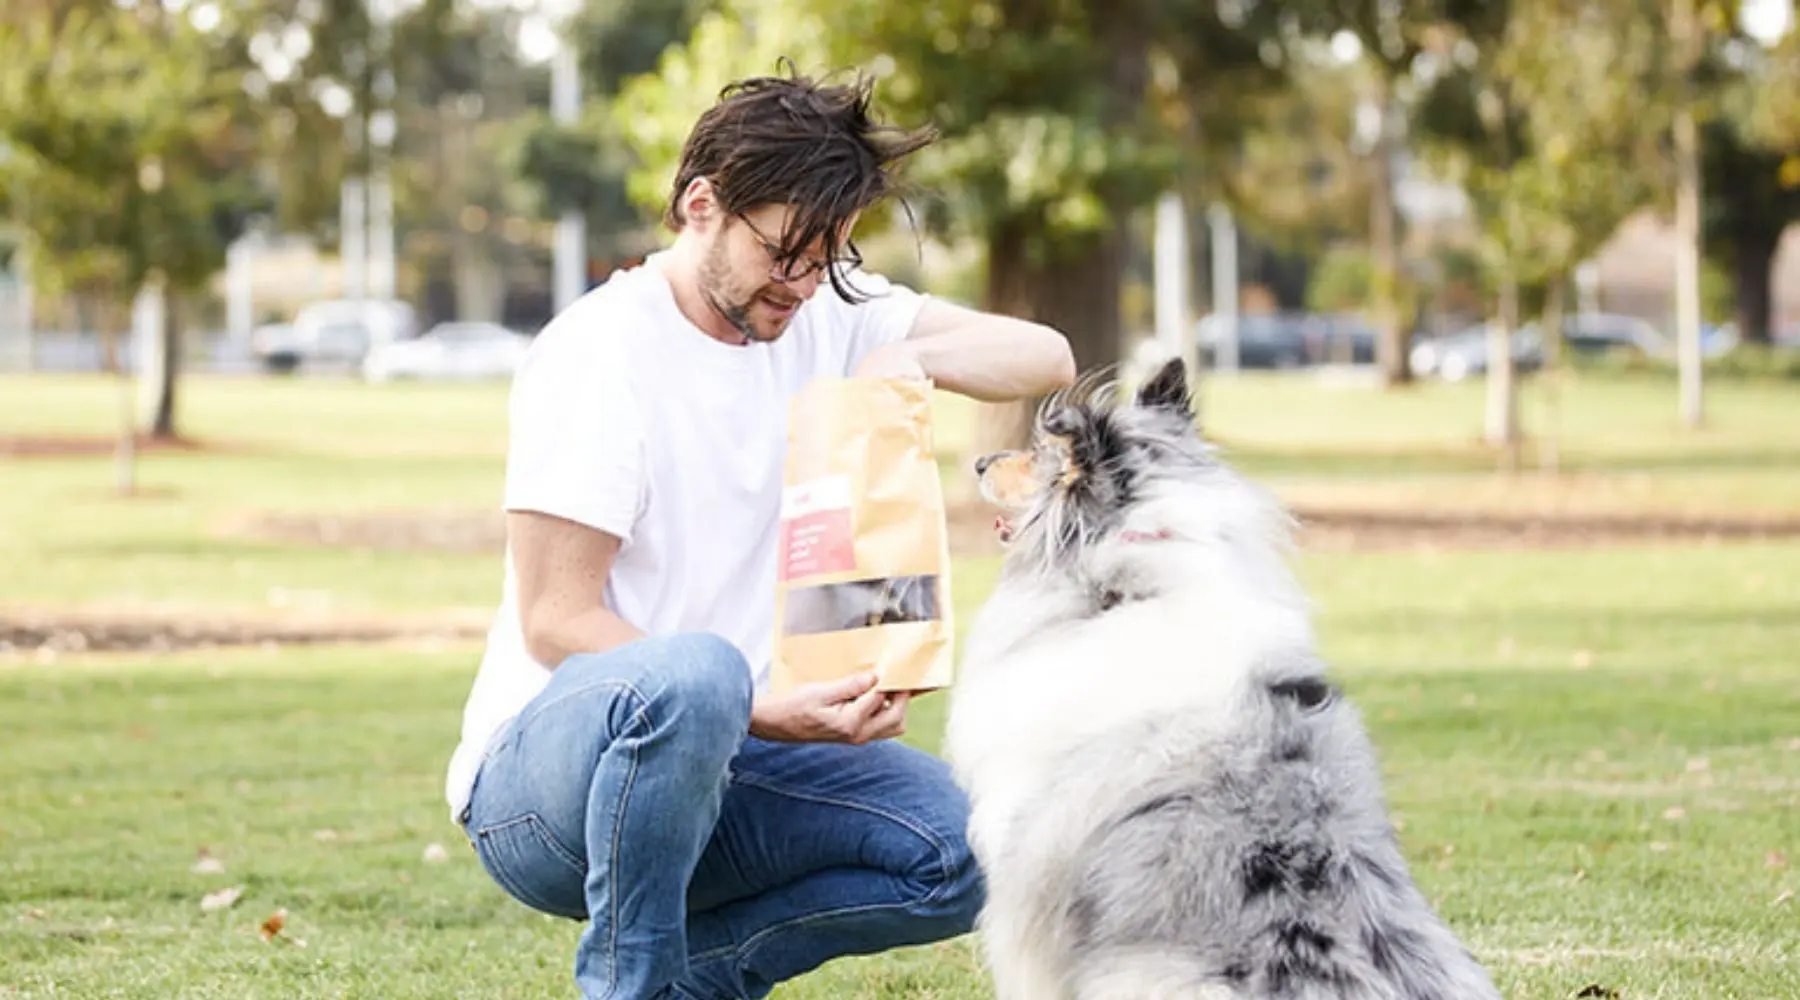 Scratch co-founder Mike Halligan and his dog.